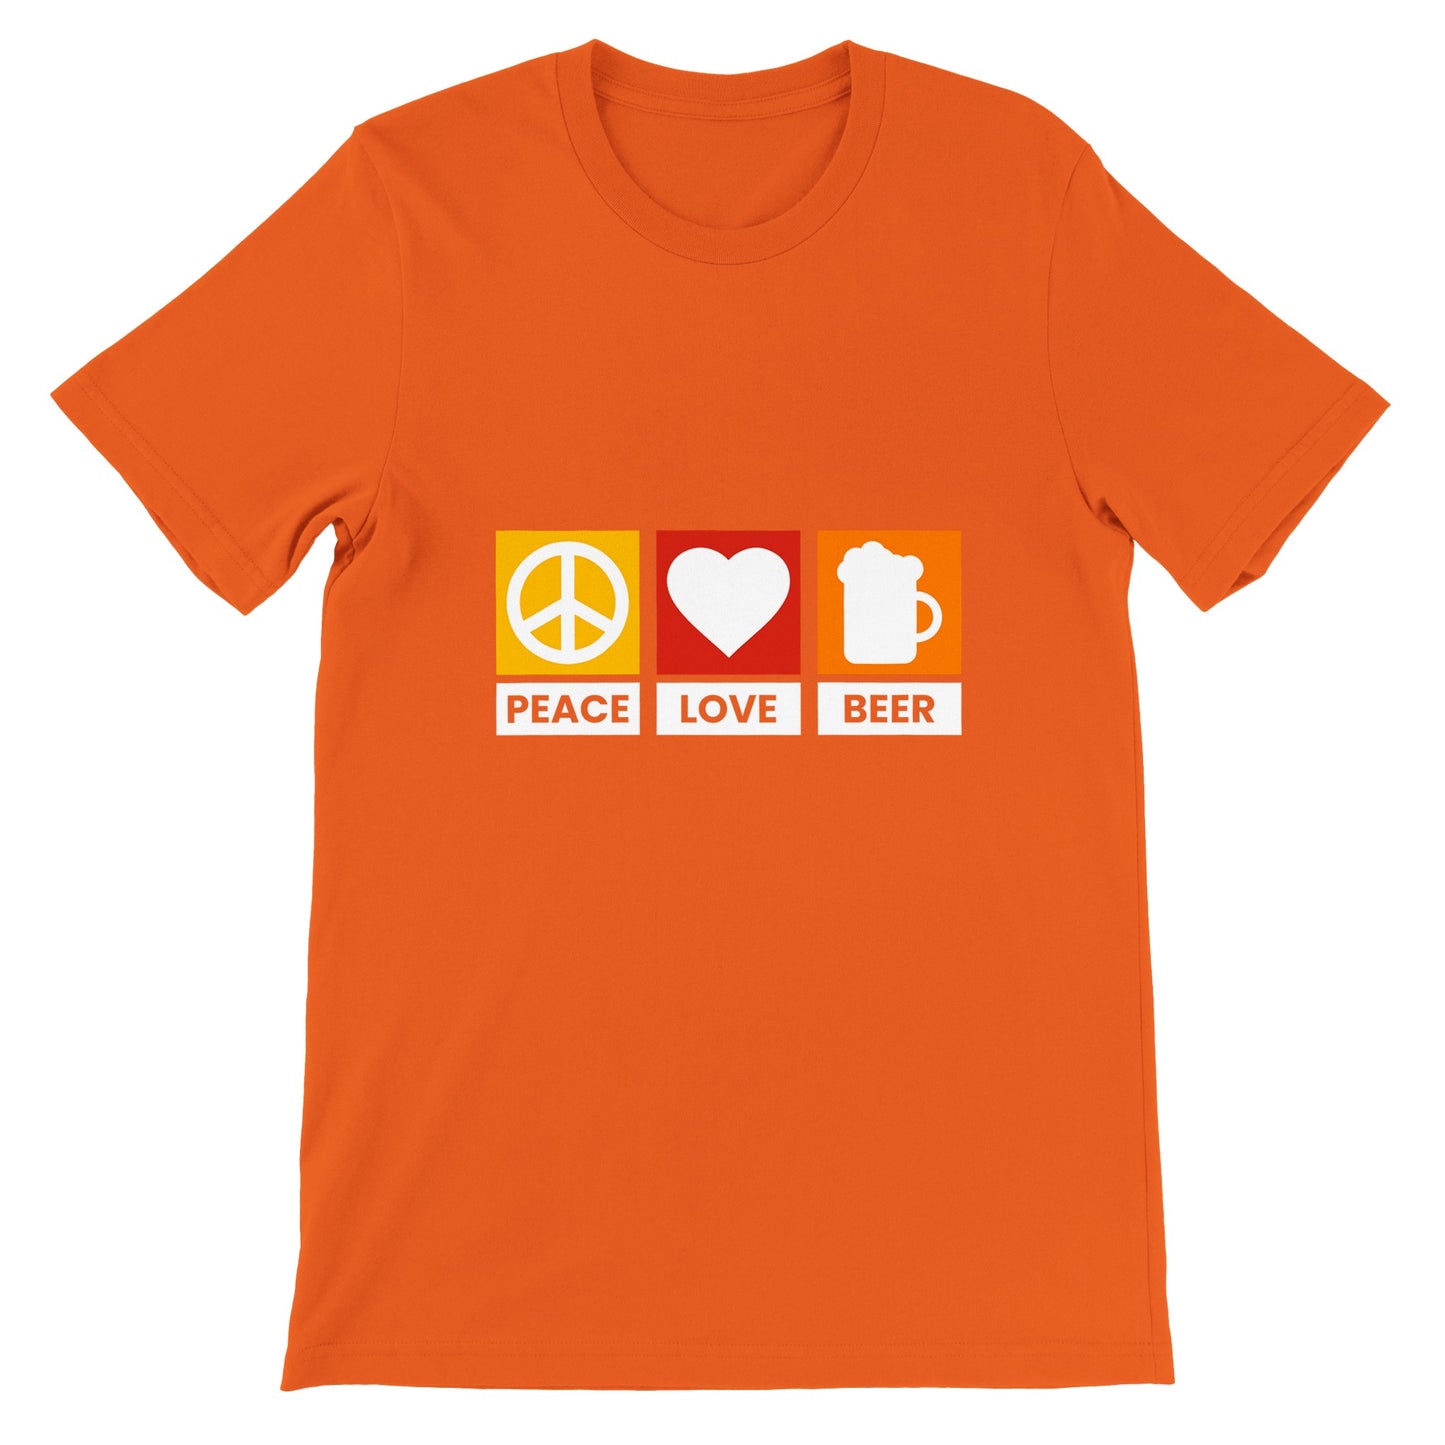 Funny T-shirts - Peace Love Beer - Premium Unisex T-shirt 